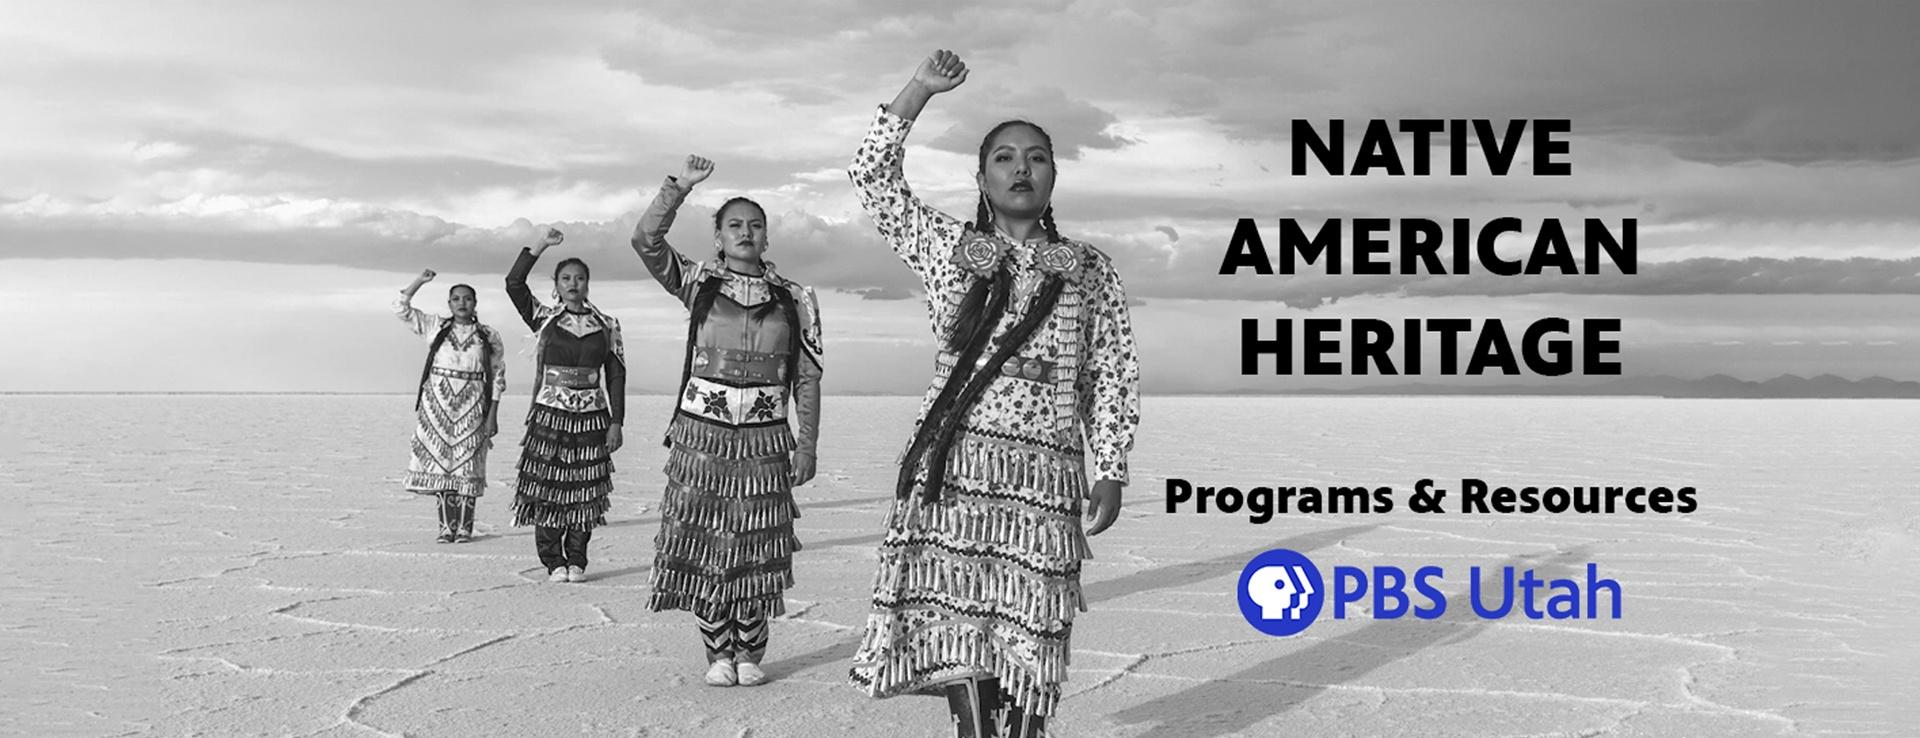 Native American Heritage | Programs and Resources